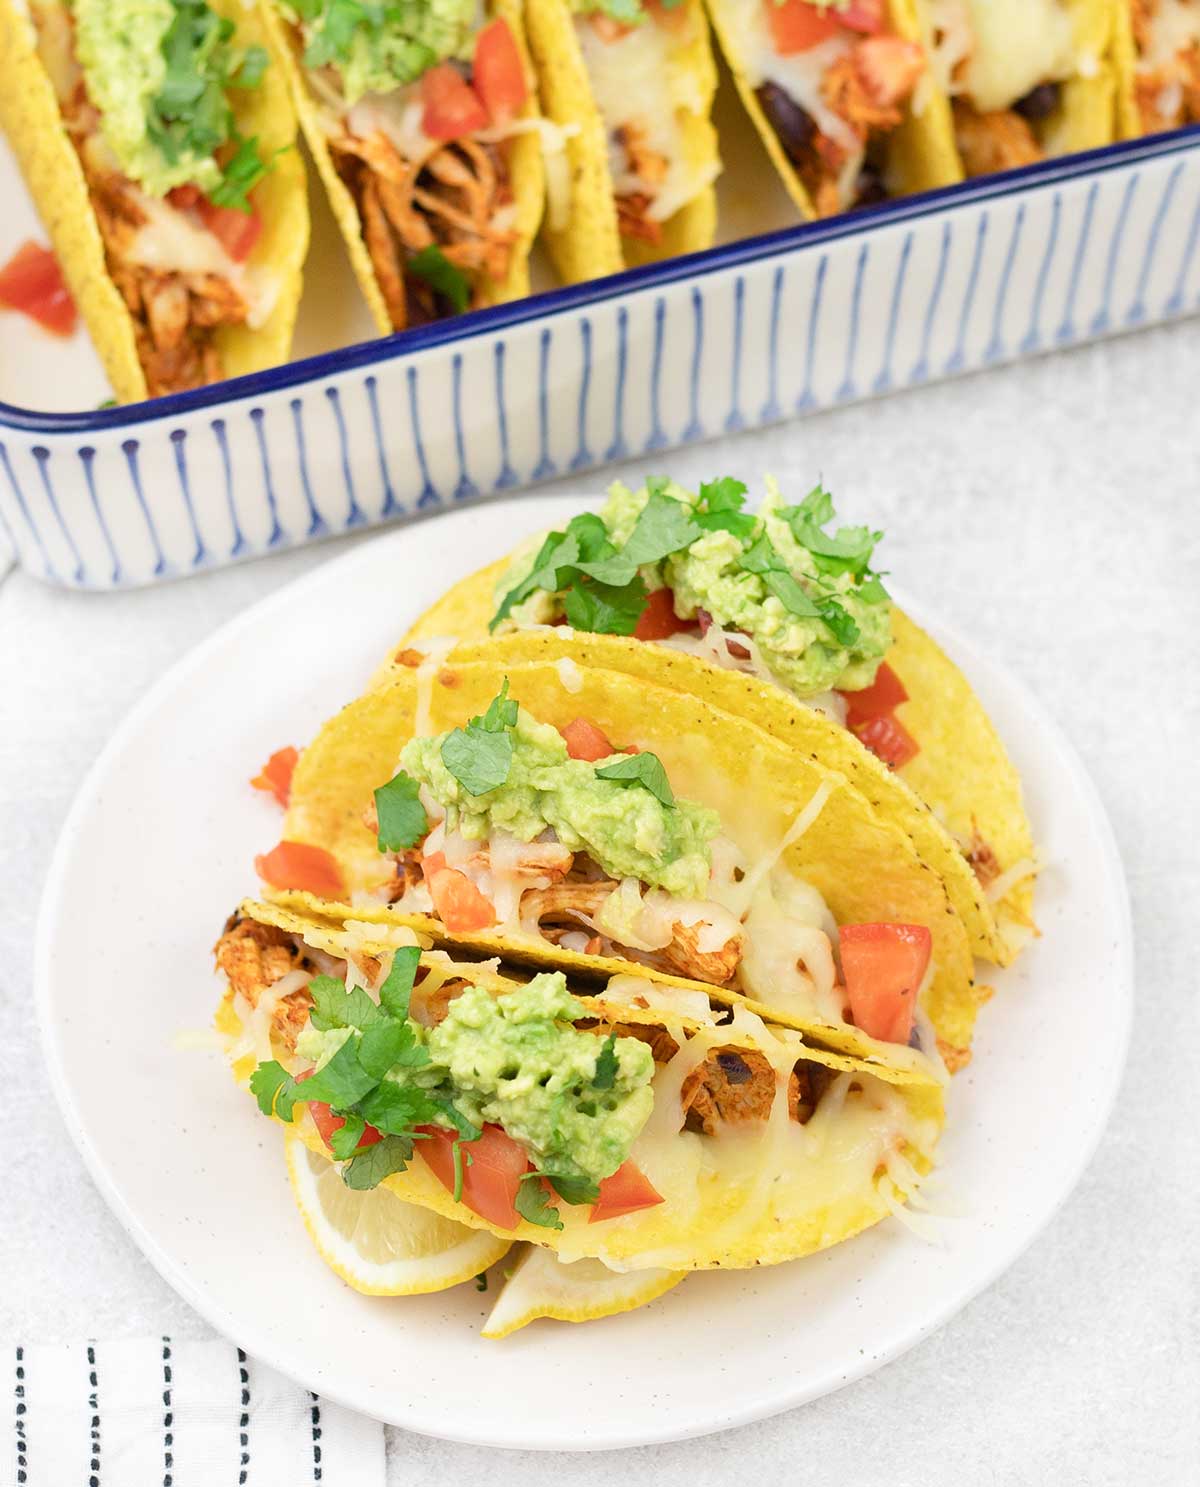 Mexican shredded chicken taco in a plate.